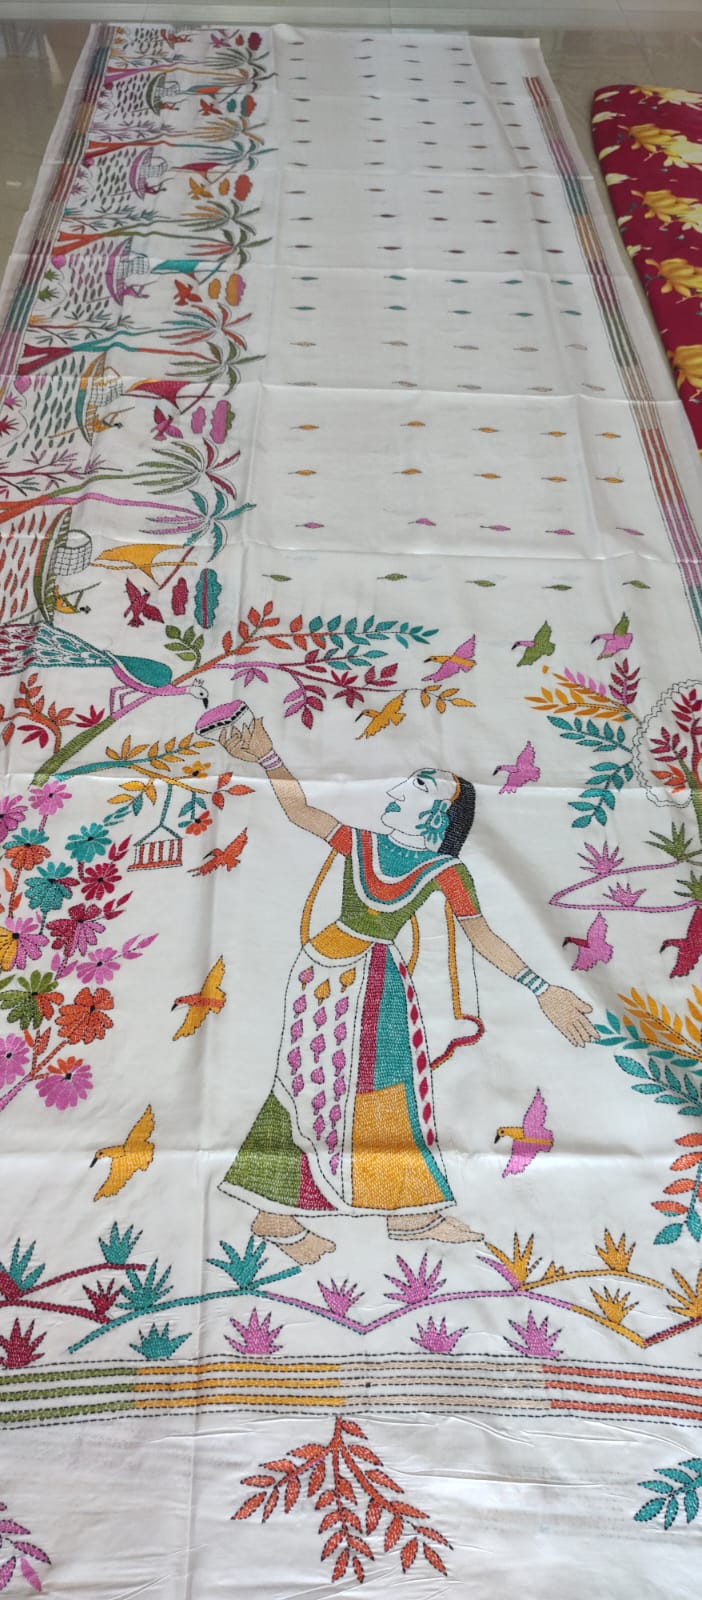 Blended silk Kantha stitch saree with Blouse piece